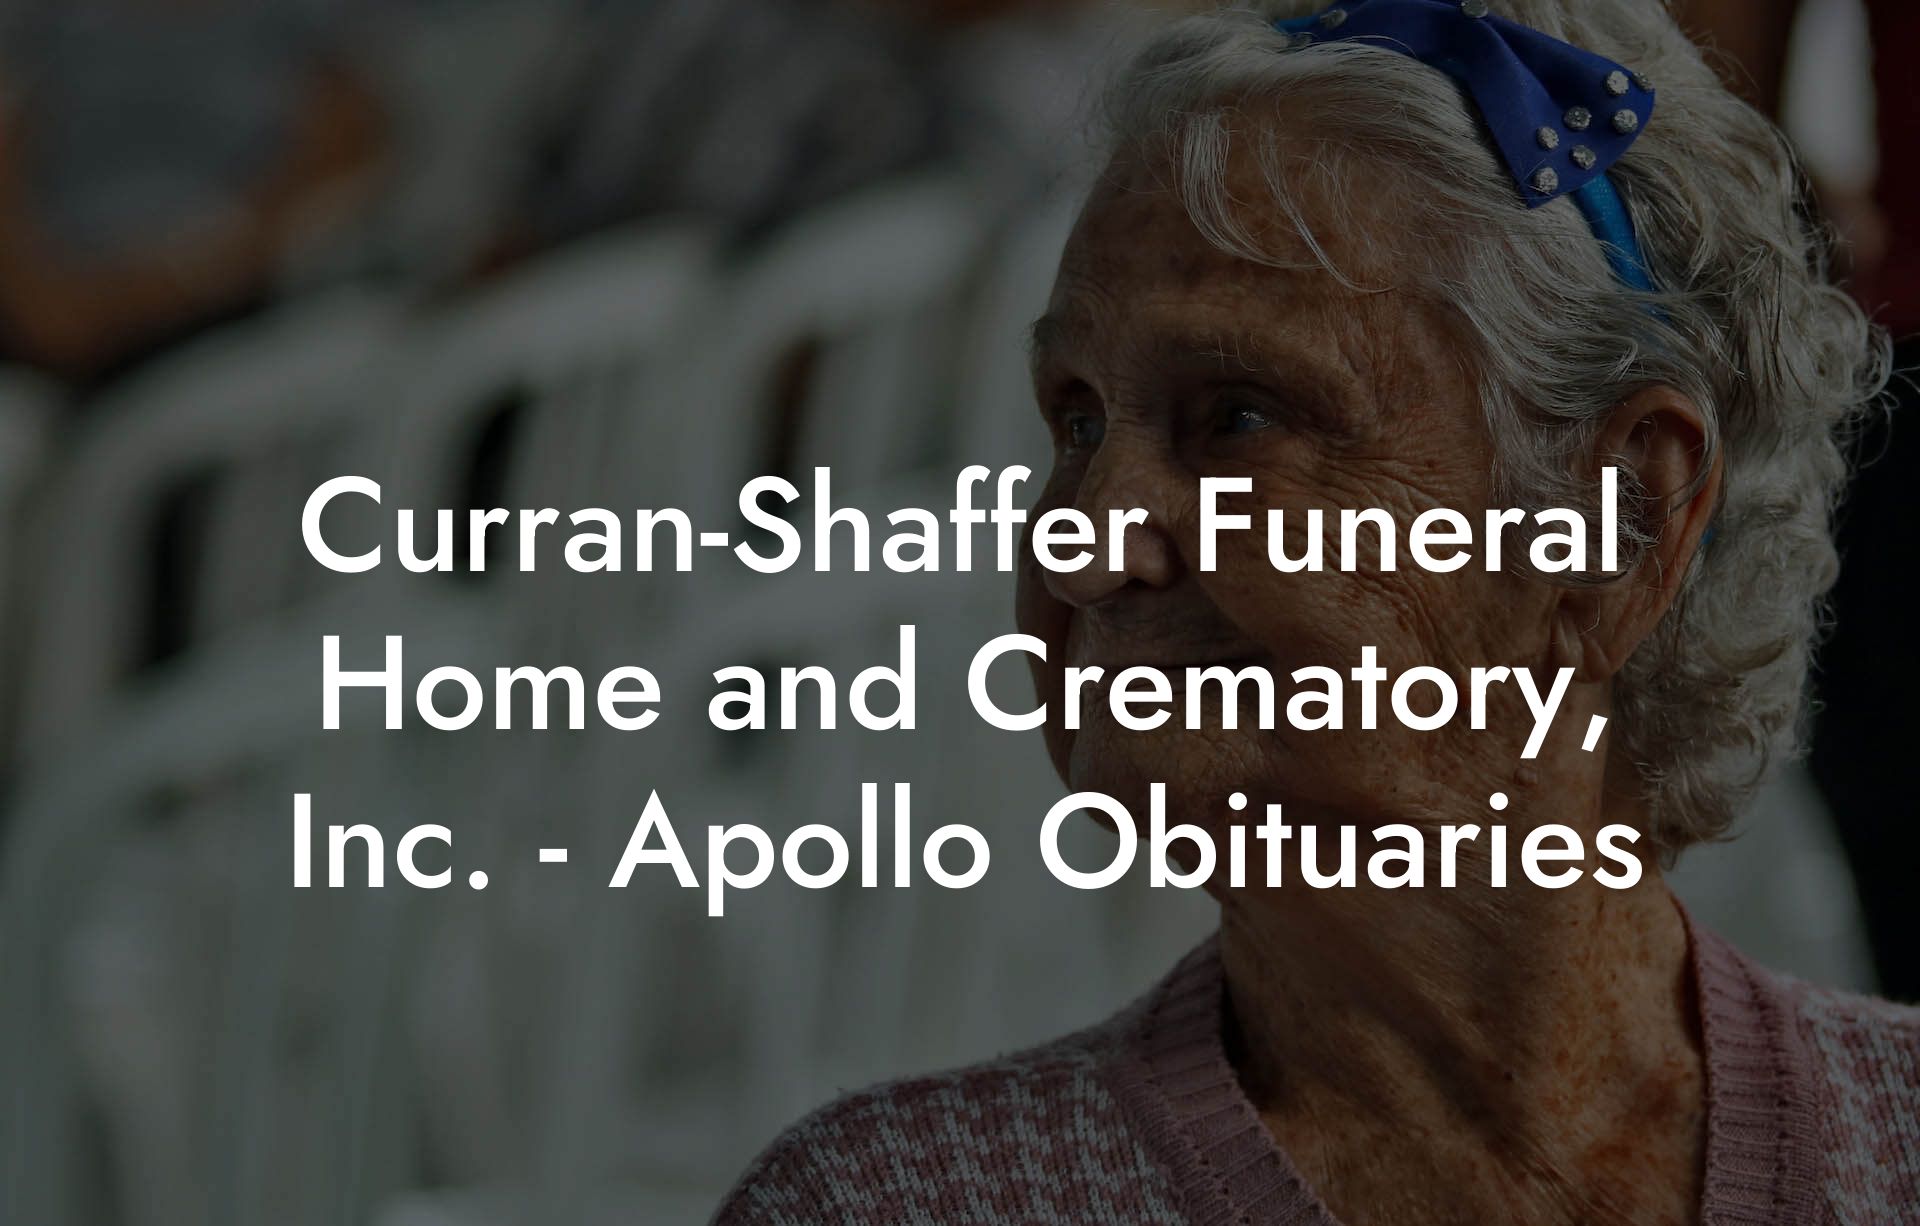 Curran-Shaffer Funeral Home and Crematory, Inc. - Apollo Obituaries